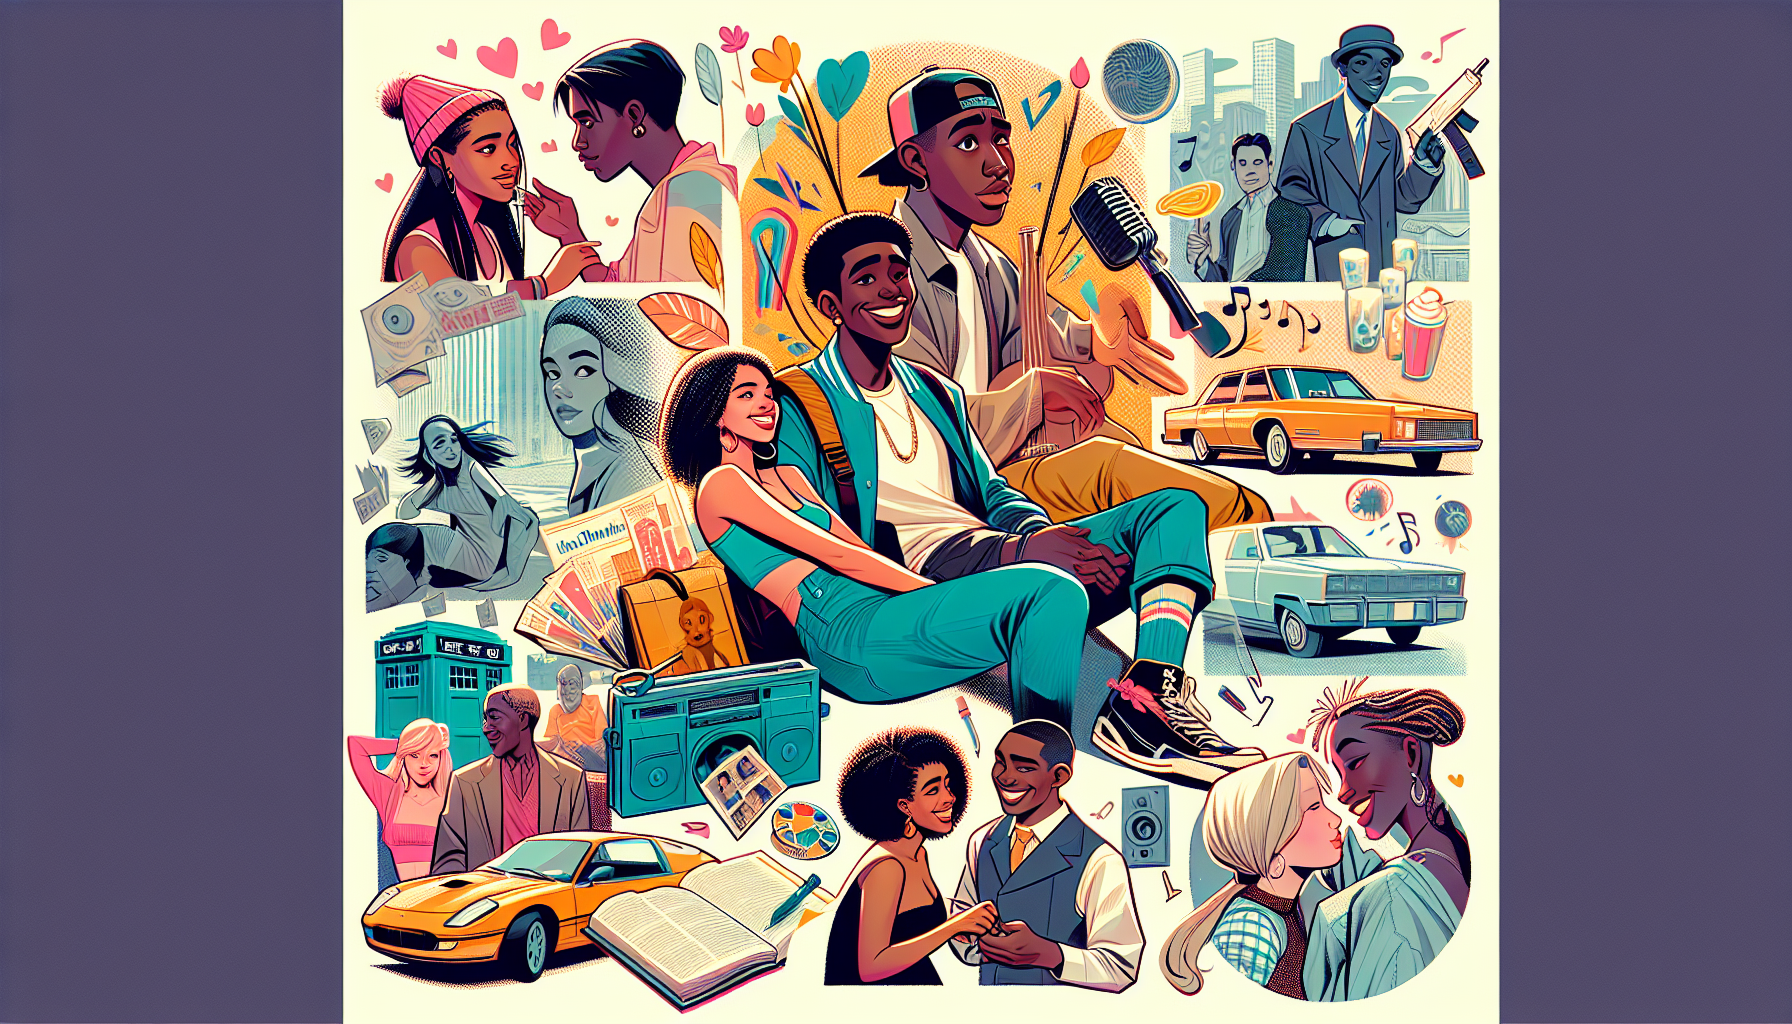 Create an illustration encapsulating a fresh take on the romantic comedy genre, steering clear of the usual clichés. The illustration should reflect the vibrancy of modern life and be rendered in vivid shades. It may feature two characters set in an uncommon circumstance that exemplifies their romantic connection, with subtle elements of comedy. Their physique, outfits and hairstyles should be representative of different continents, for example, one character to be a Black man and the other one a Caucasian woman, signifying diversity. Include easily identifiable elements that portray everyday life but sprinkle them with unexpected twists to symbolize the creative deviation from the clichéd romantic comedy storytelling.